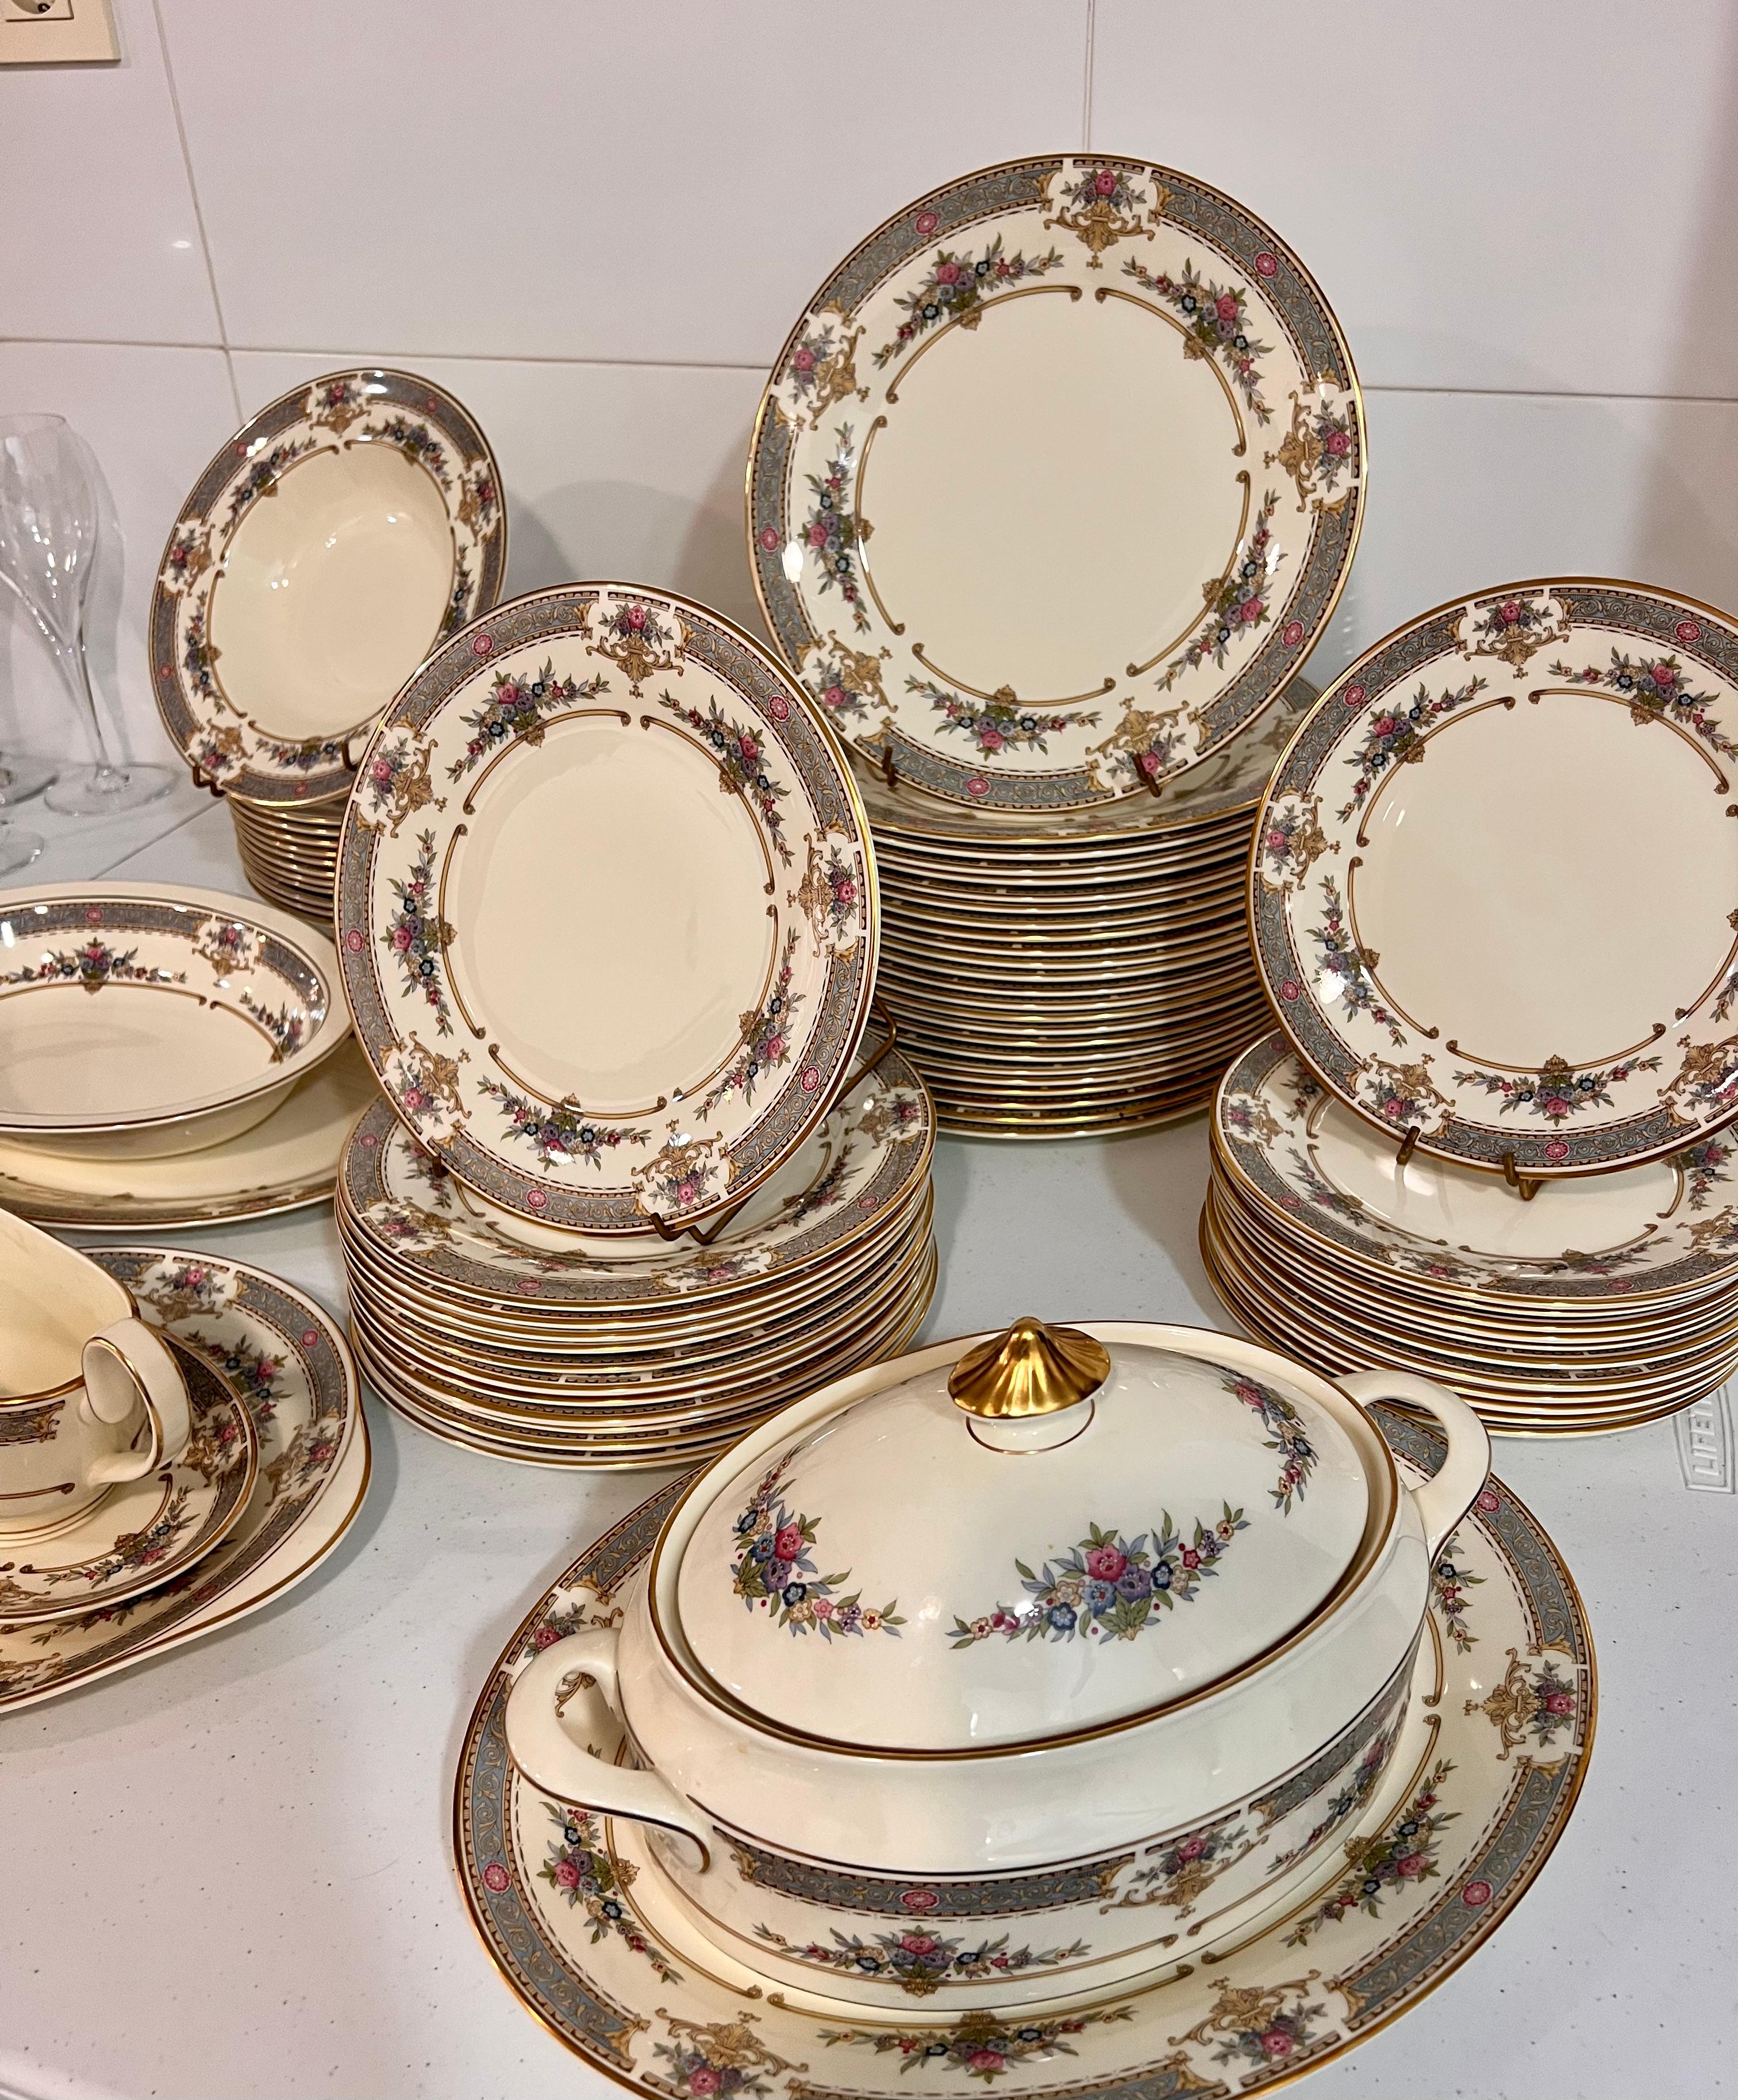 Dinner Plate Replacement Flatware & Dinnerware Minton Persian Rose by Royal Doulton

Width: 10 1/2 in
Crafted In England
Hand Wash

Request info for flatware and diner ware 
we sell them individually or in sets
We have a full collection that